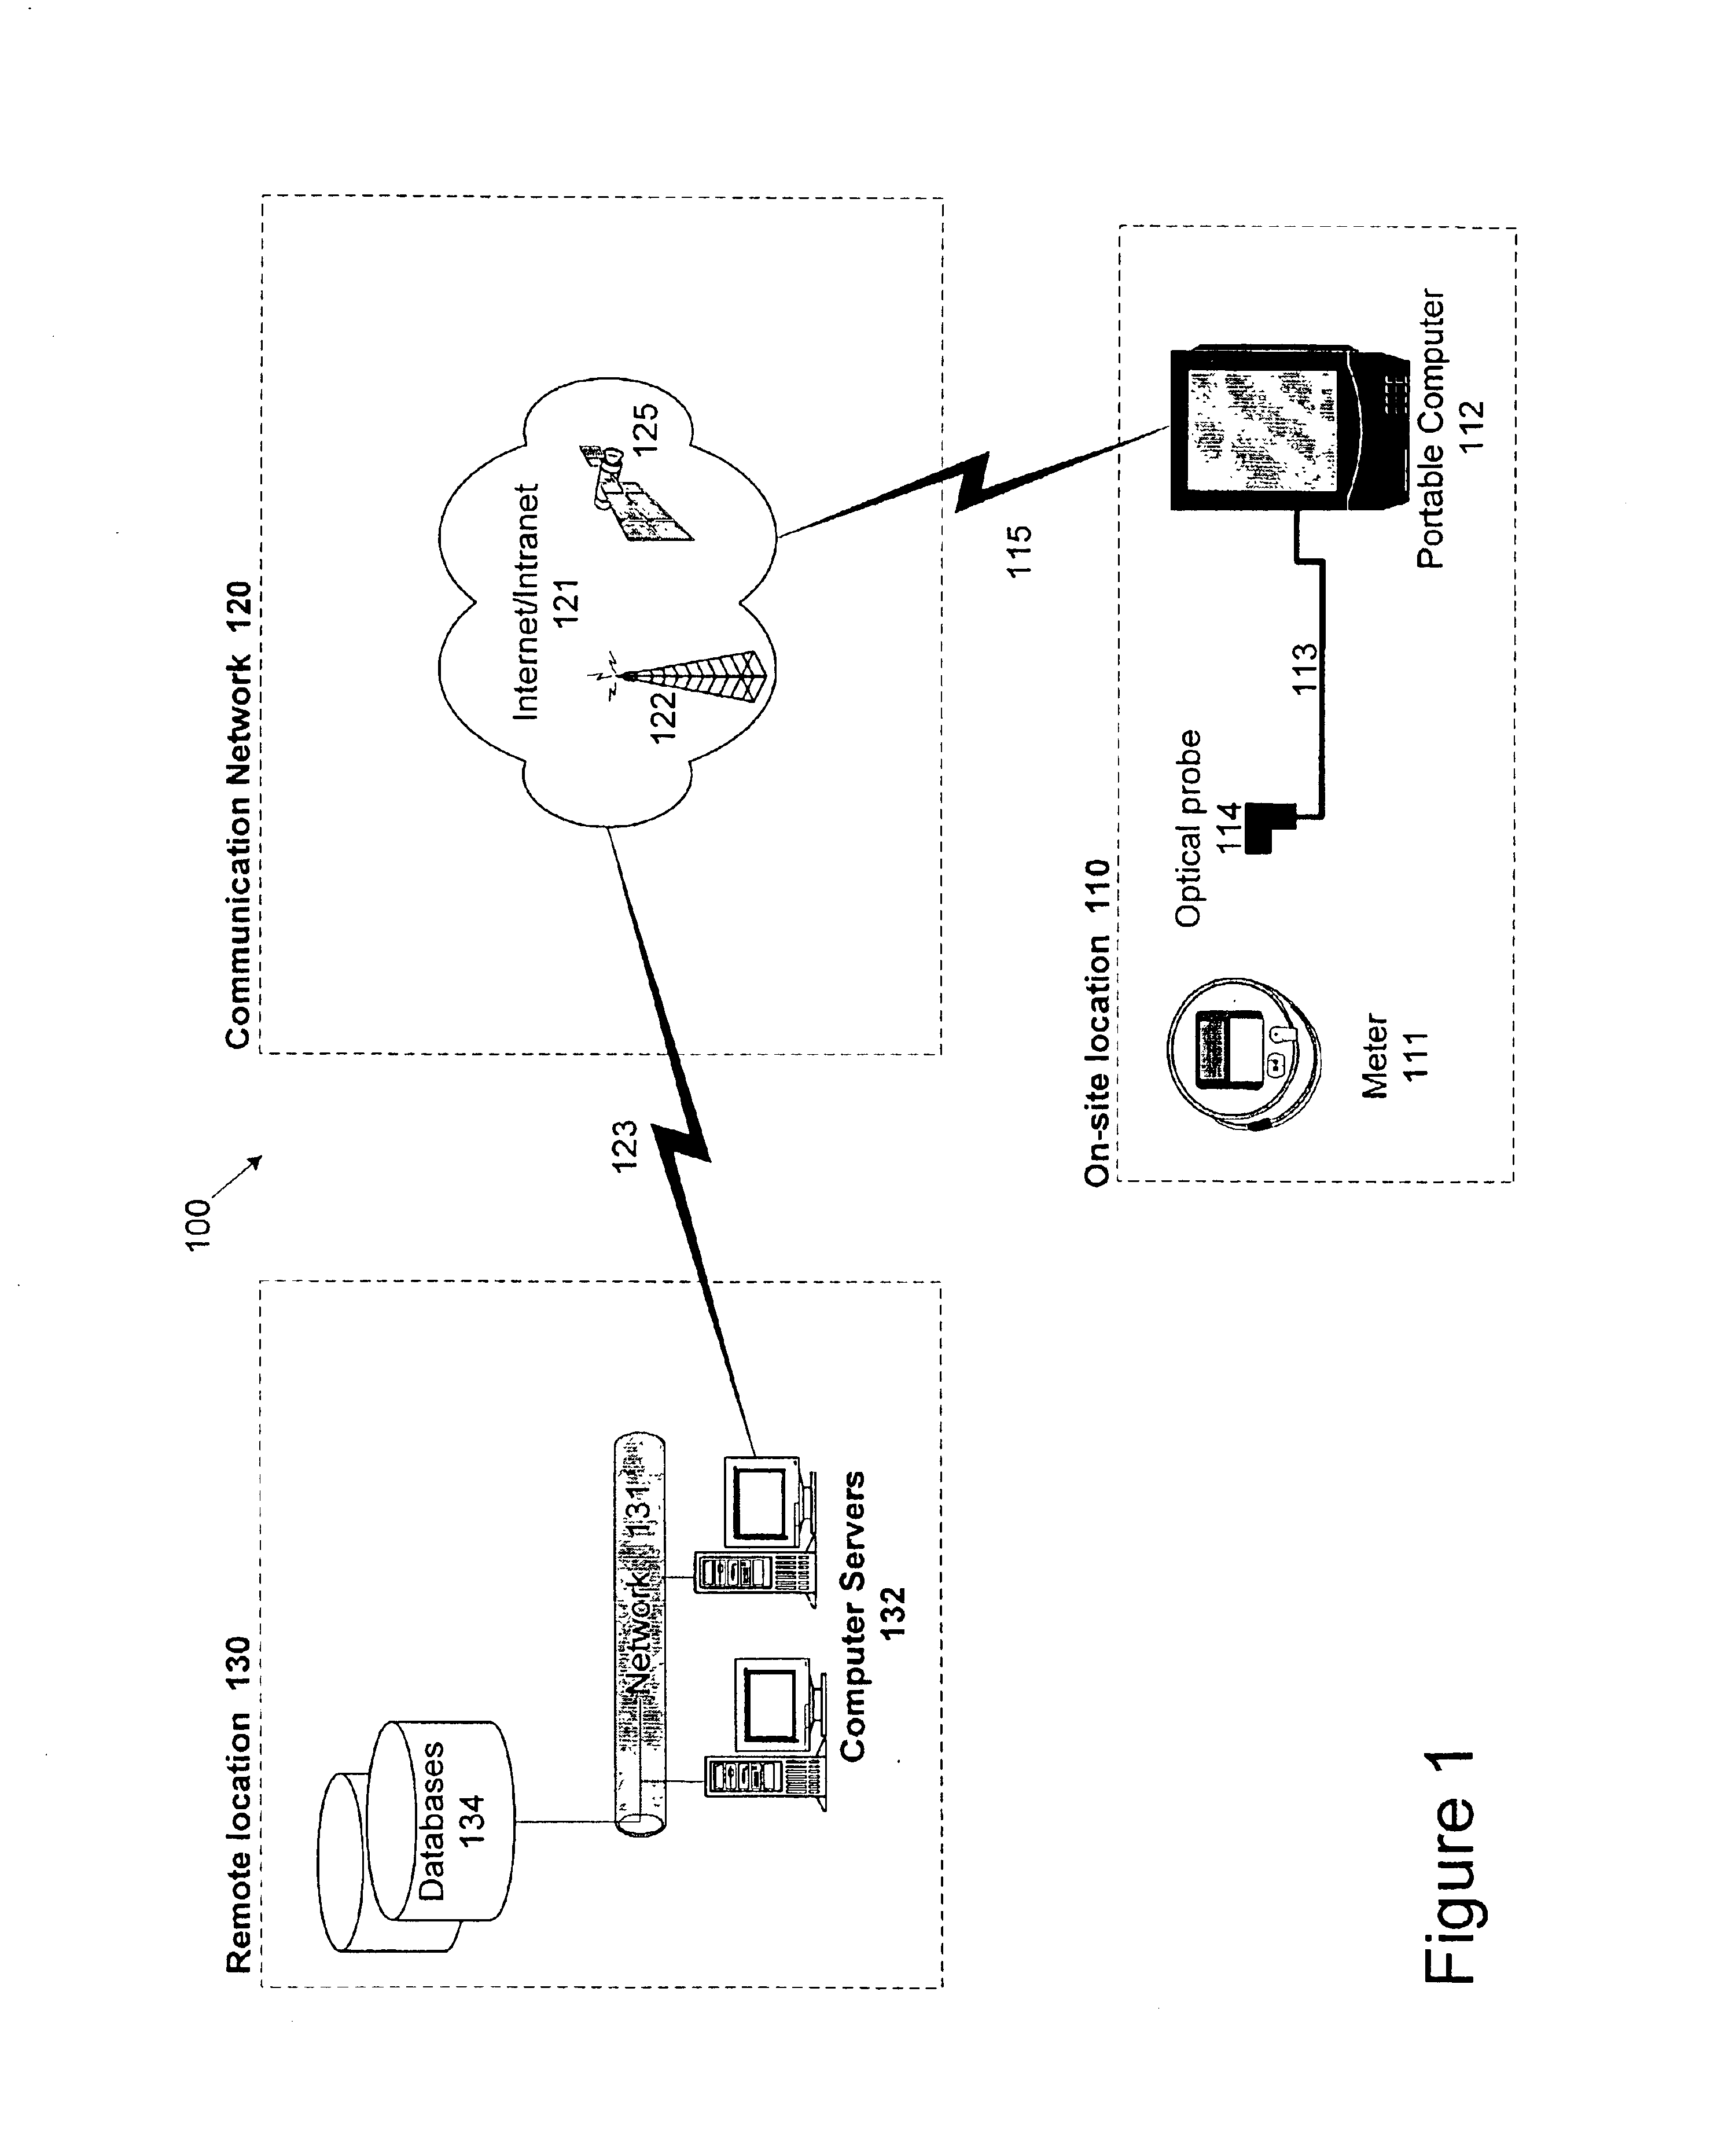 Automated on-site meter registration confirmation using a portable, wireless computing device